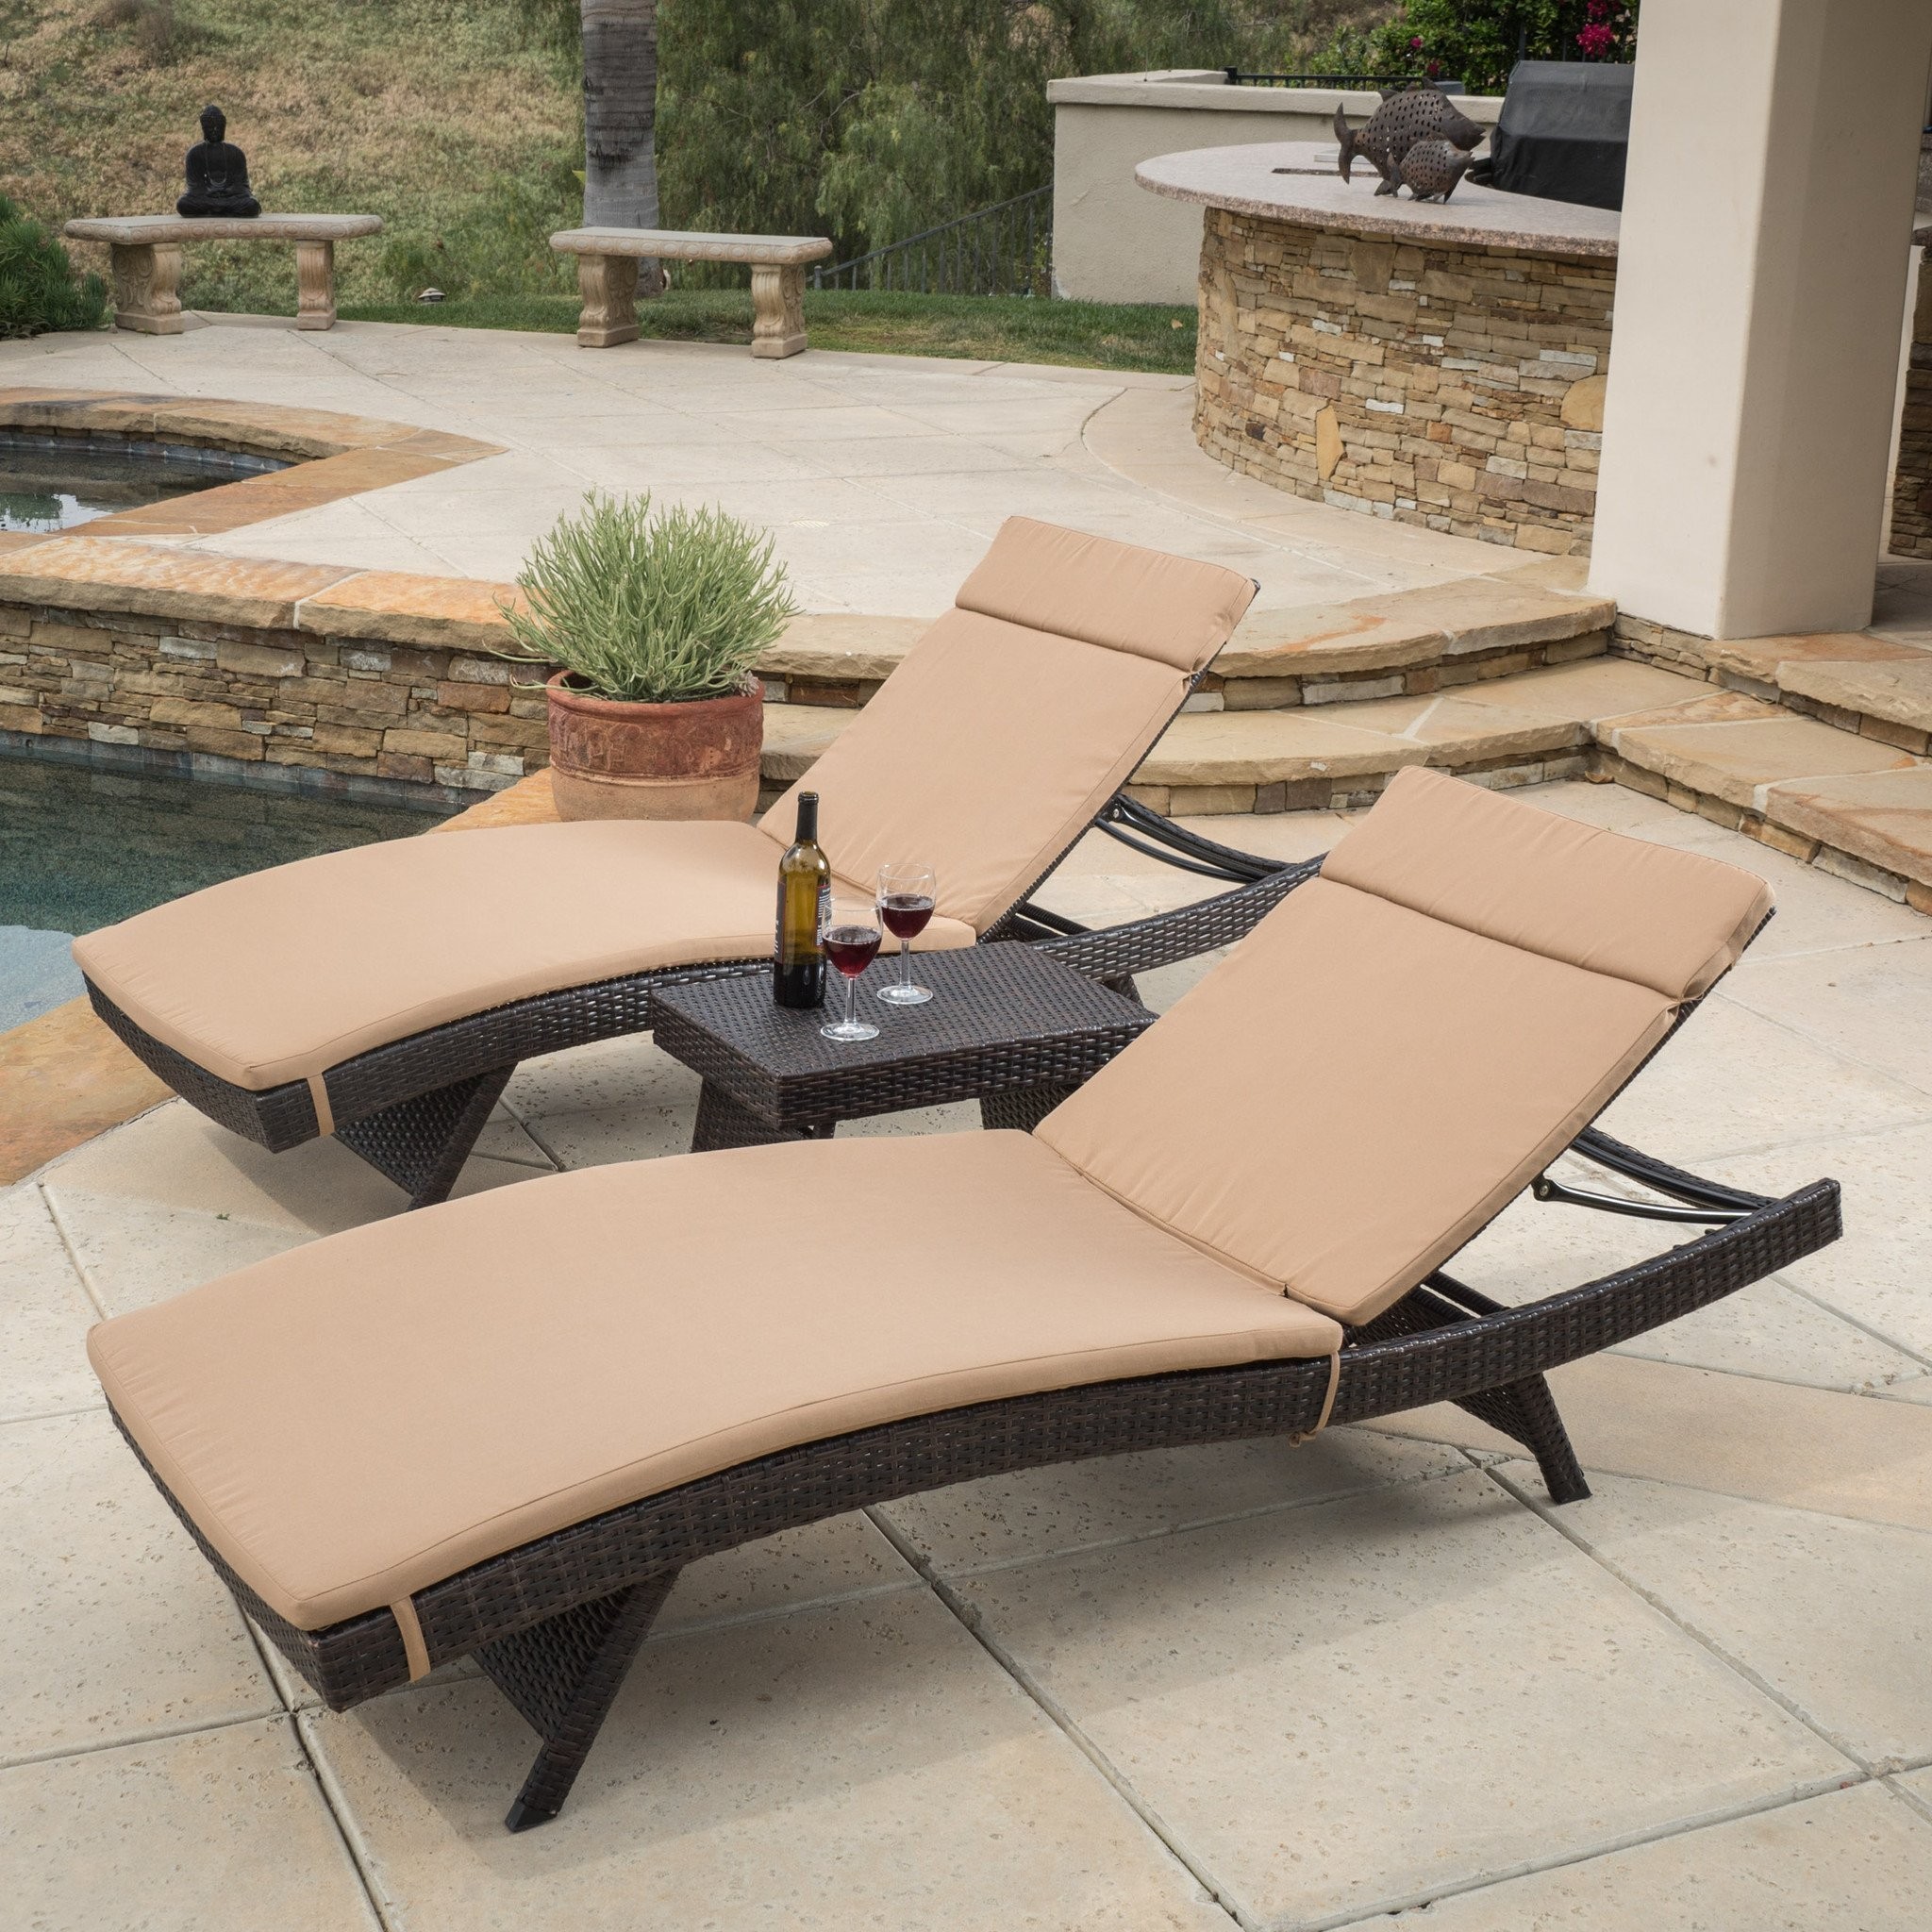 Lakeport Outdoor 3pc Adjustable Caramel Chaise Lou...